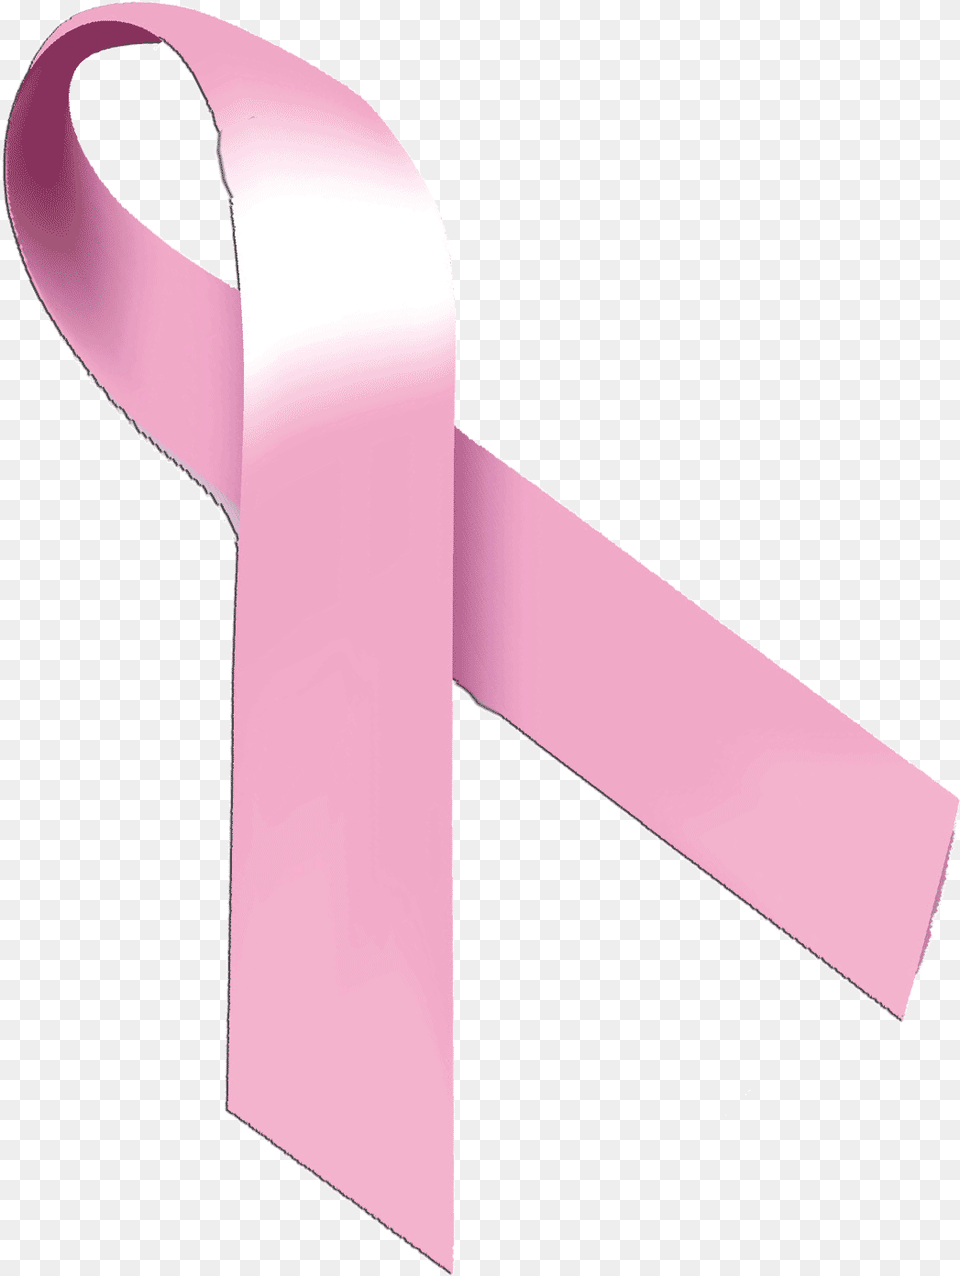 Cancer Ribbon Hd Pink Ribbon Cancer, Accessories, Formal Wear, Tie, Belt Png